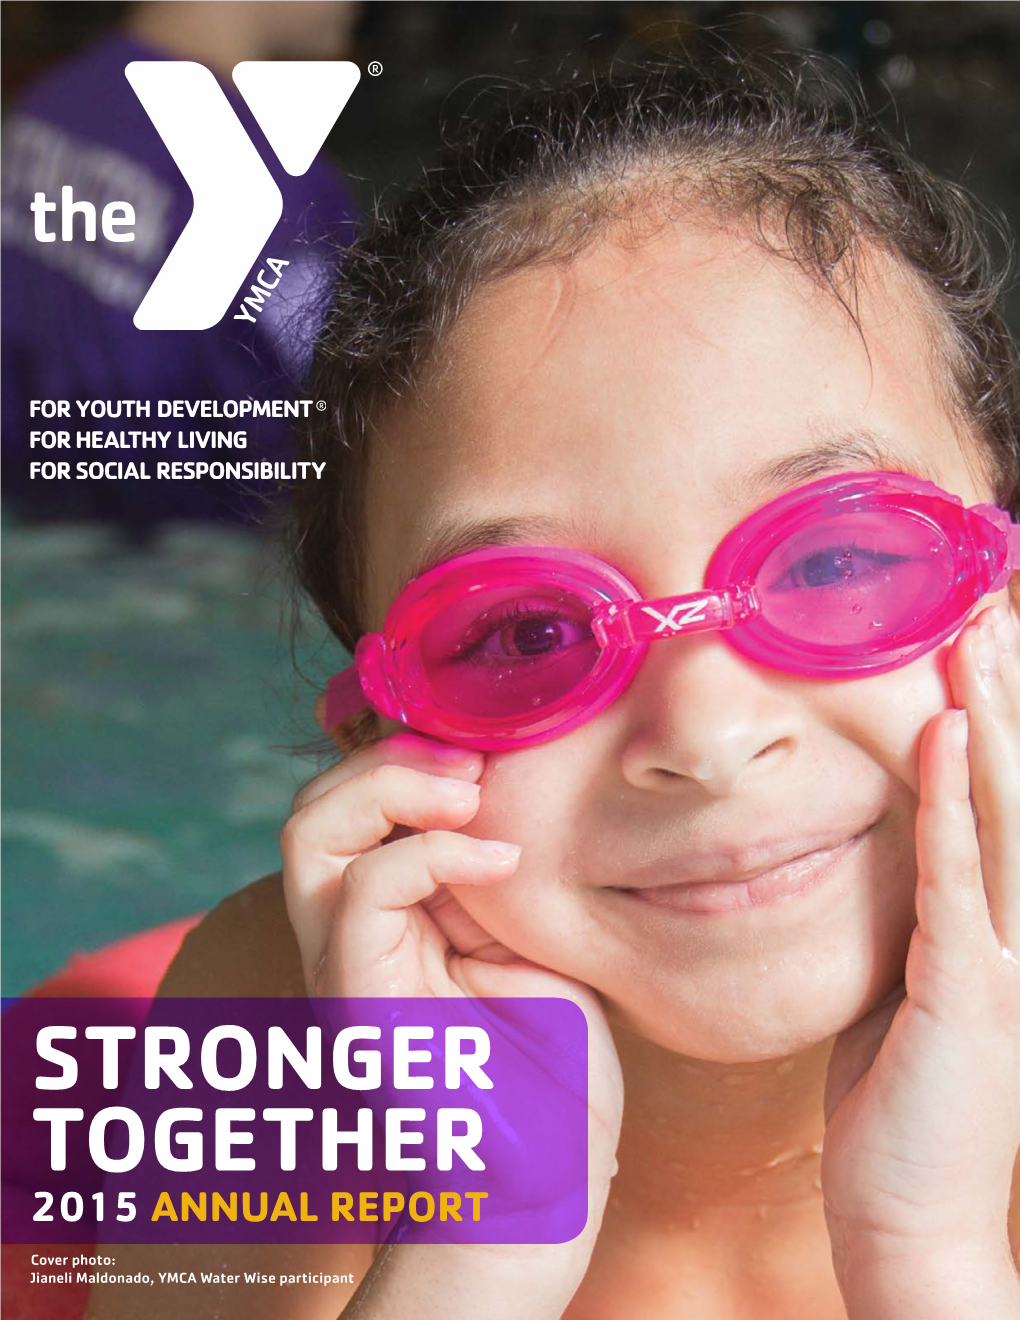 Stronger Together 2015 Annual Report